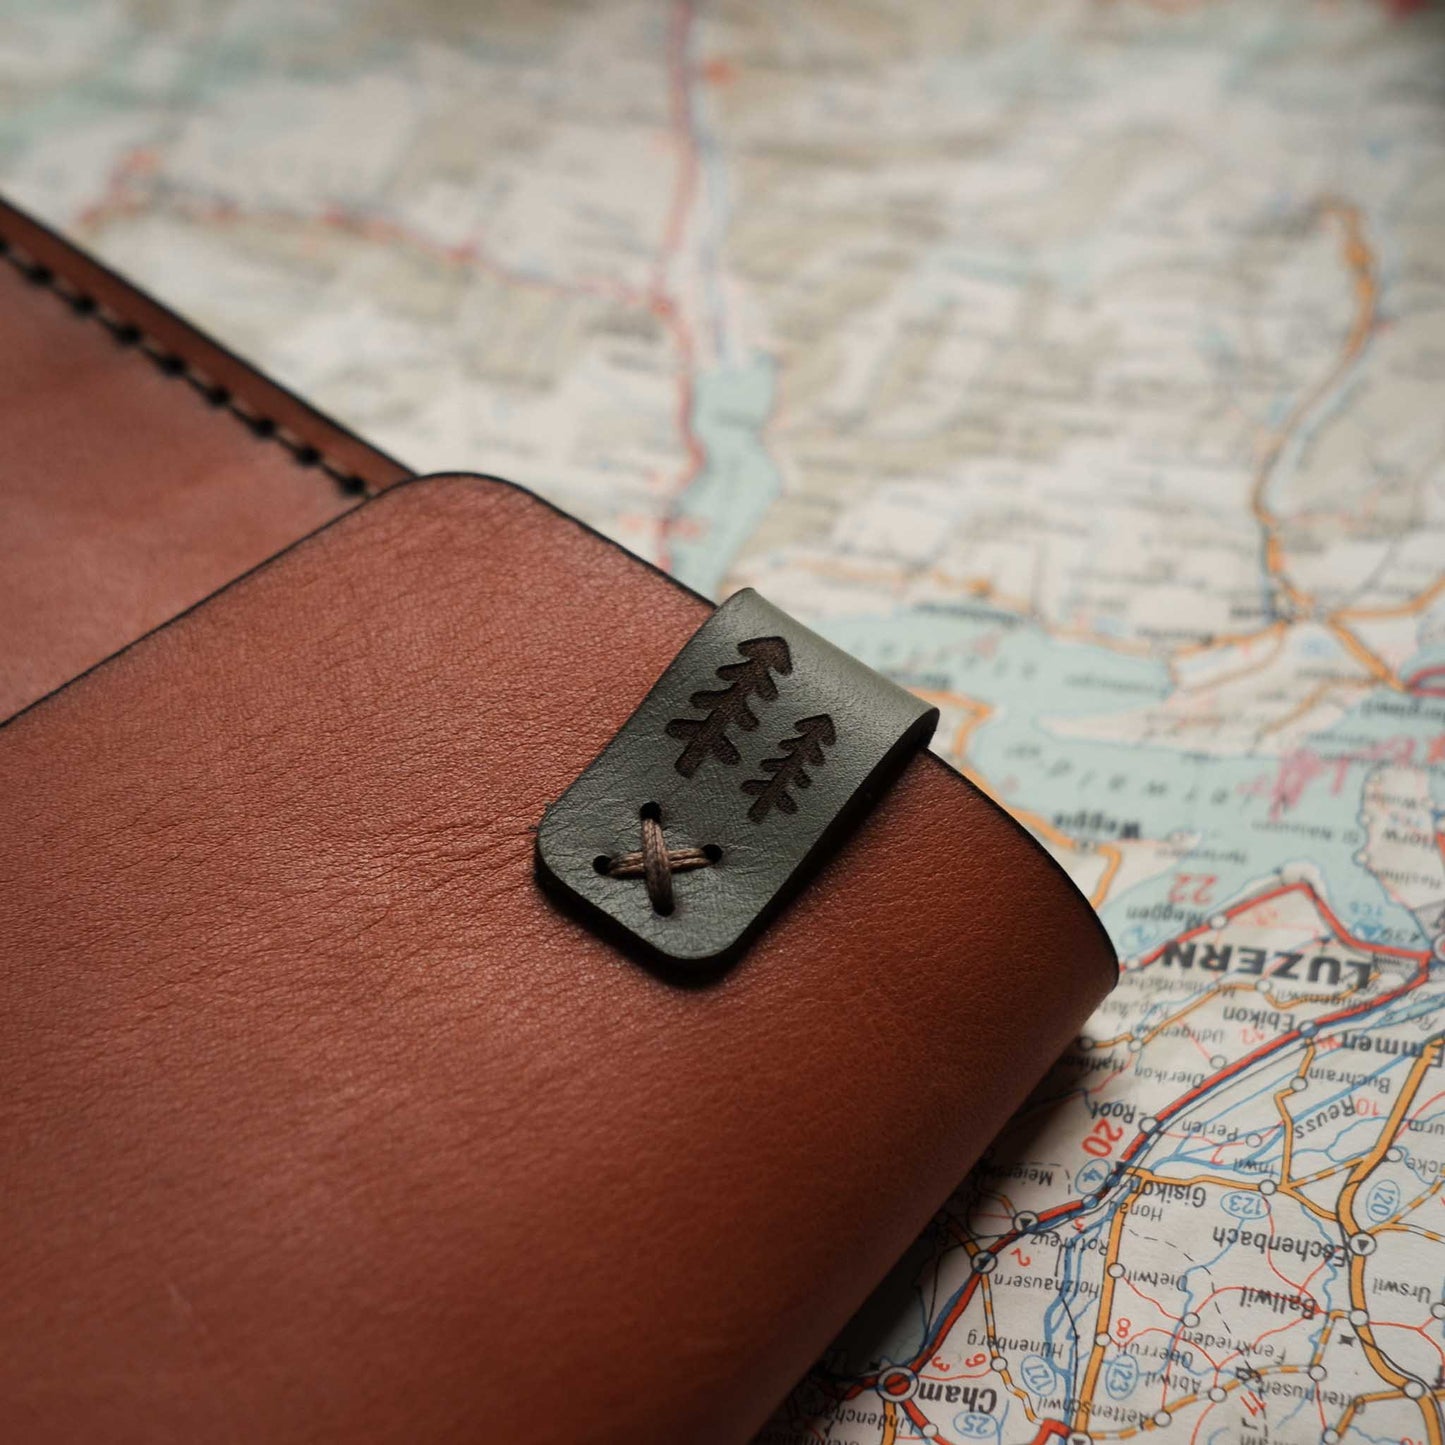 A4 Leather Notebook Cover - Adventure Range - The Great Break